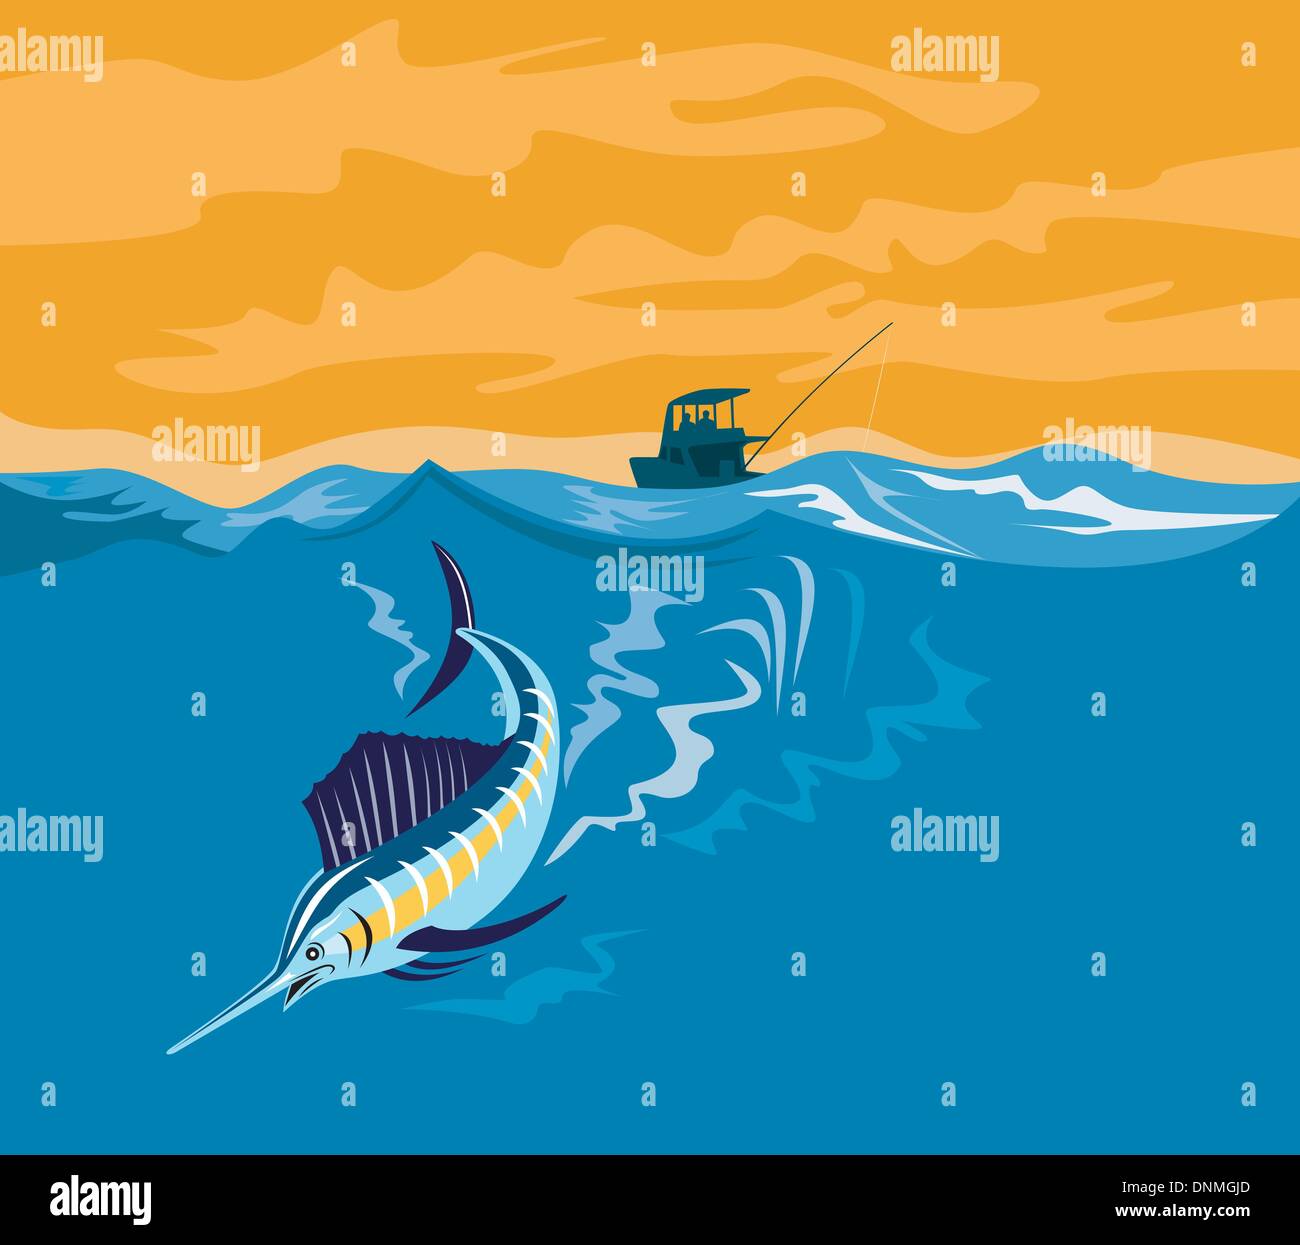 Illustration of a sailfish fish jumping with fishing boat in background done in retro style. Stock Vector